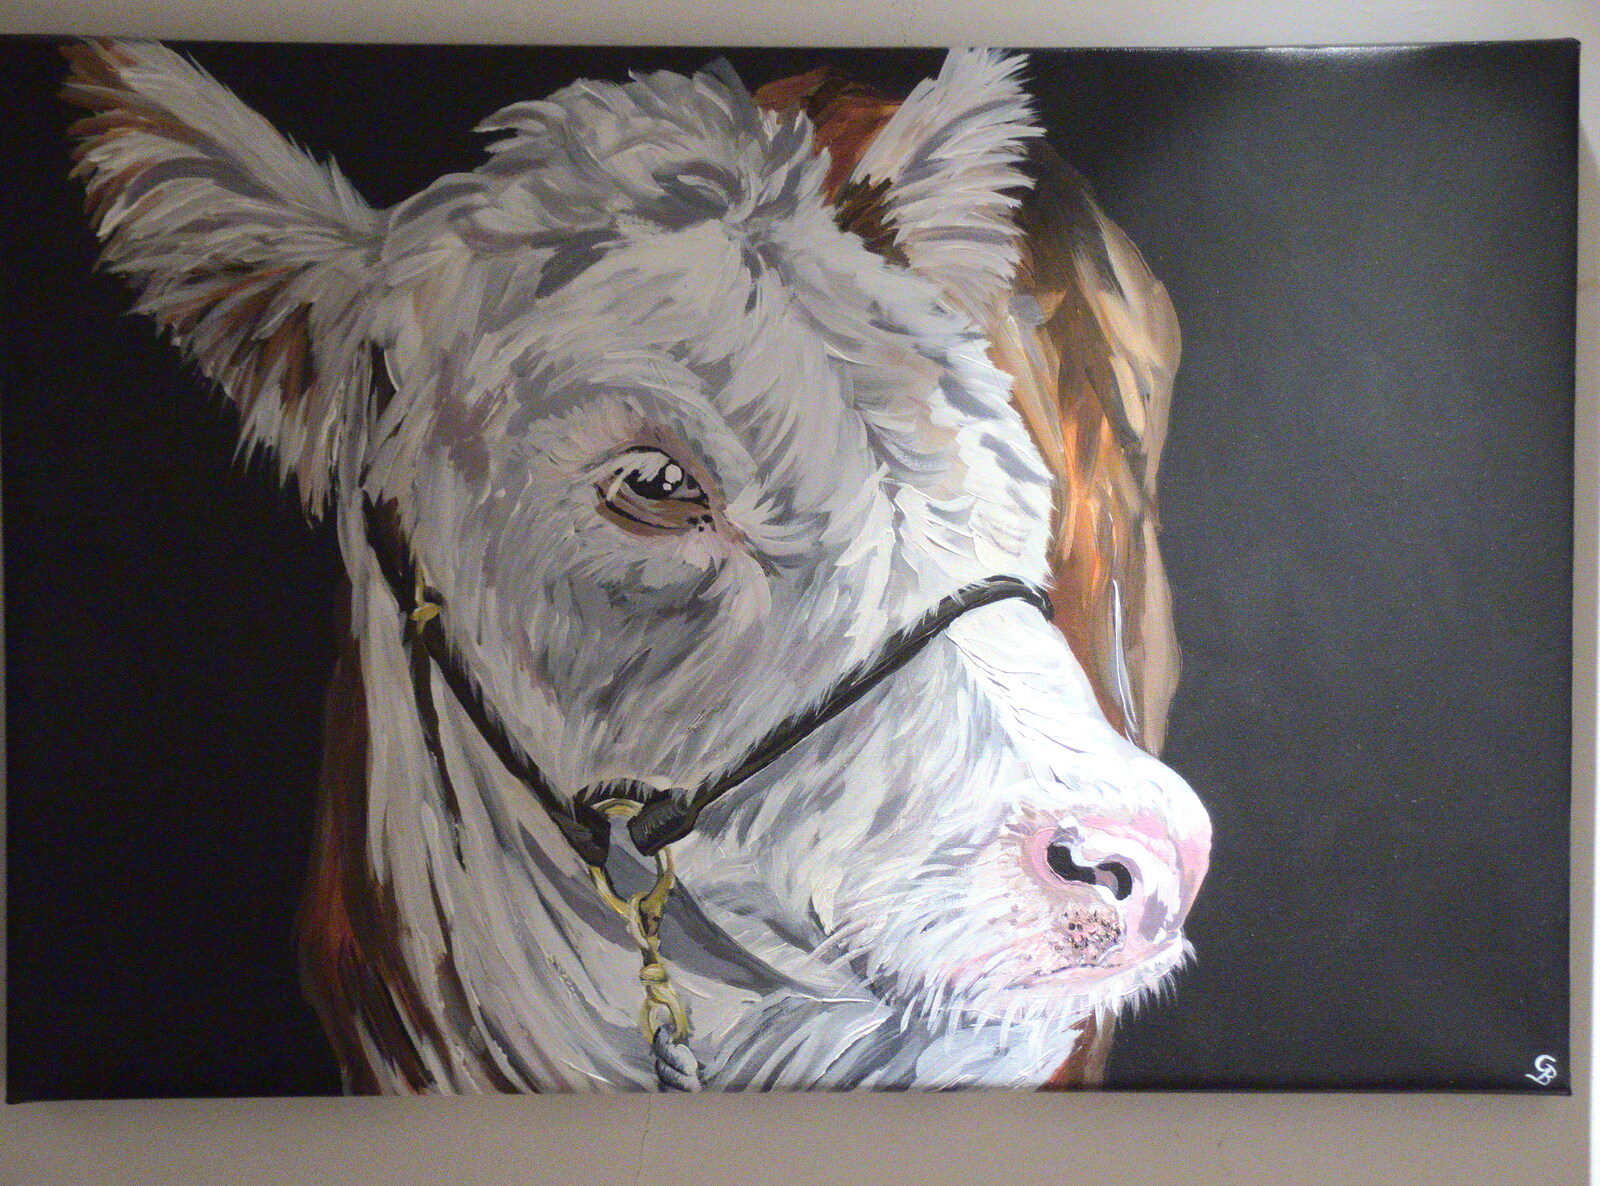 A painting of a cow from New Year's Eve, The Oaksmere, Brome, Suffolk - 31st December 2016